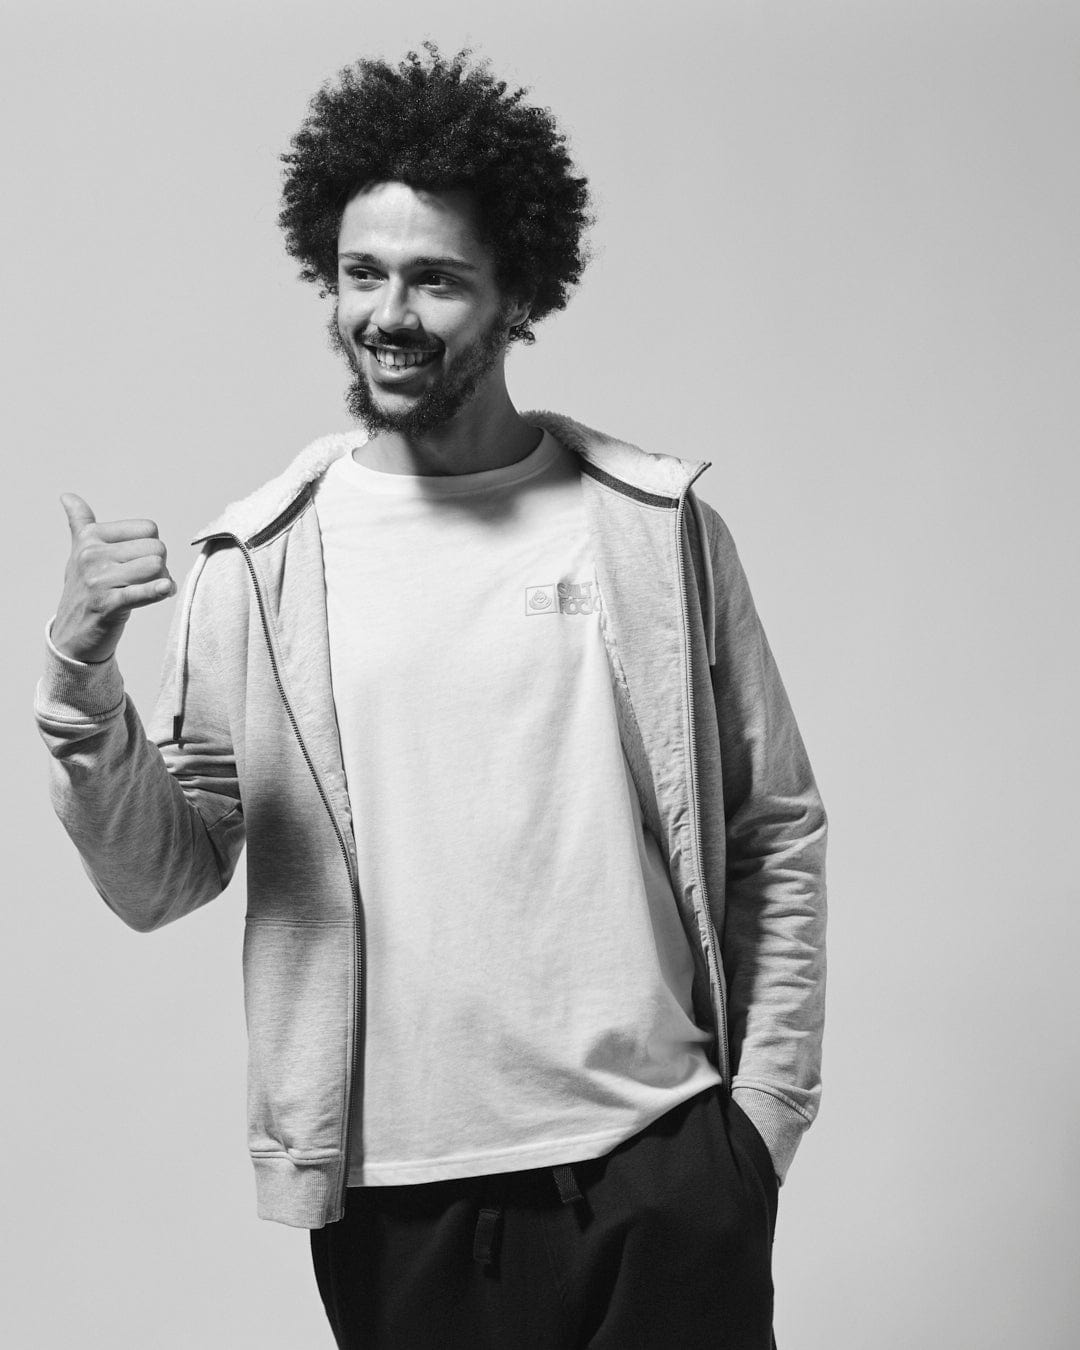 A man with facial hair and curly hair smiles and gives a thumbs-up sign to the camera, dressed in a Saltrock Original - Mens Short Sleeve T-Shirt - White with a crew neckline against a plain background.